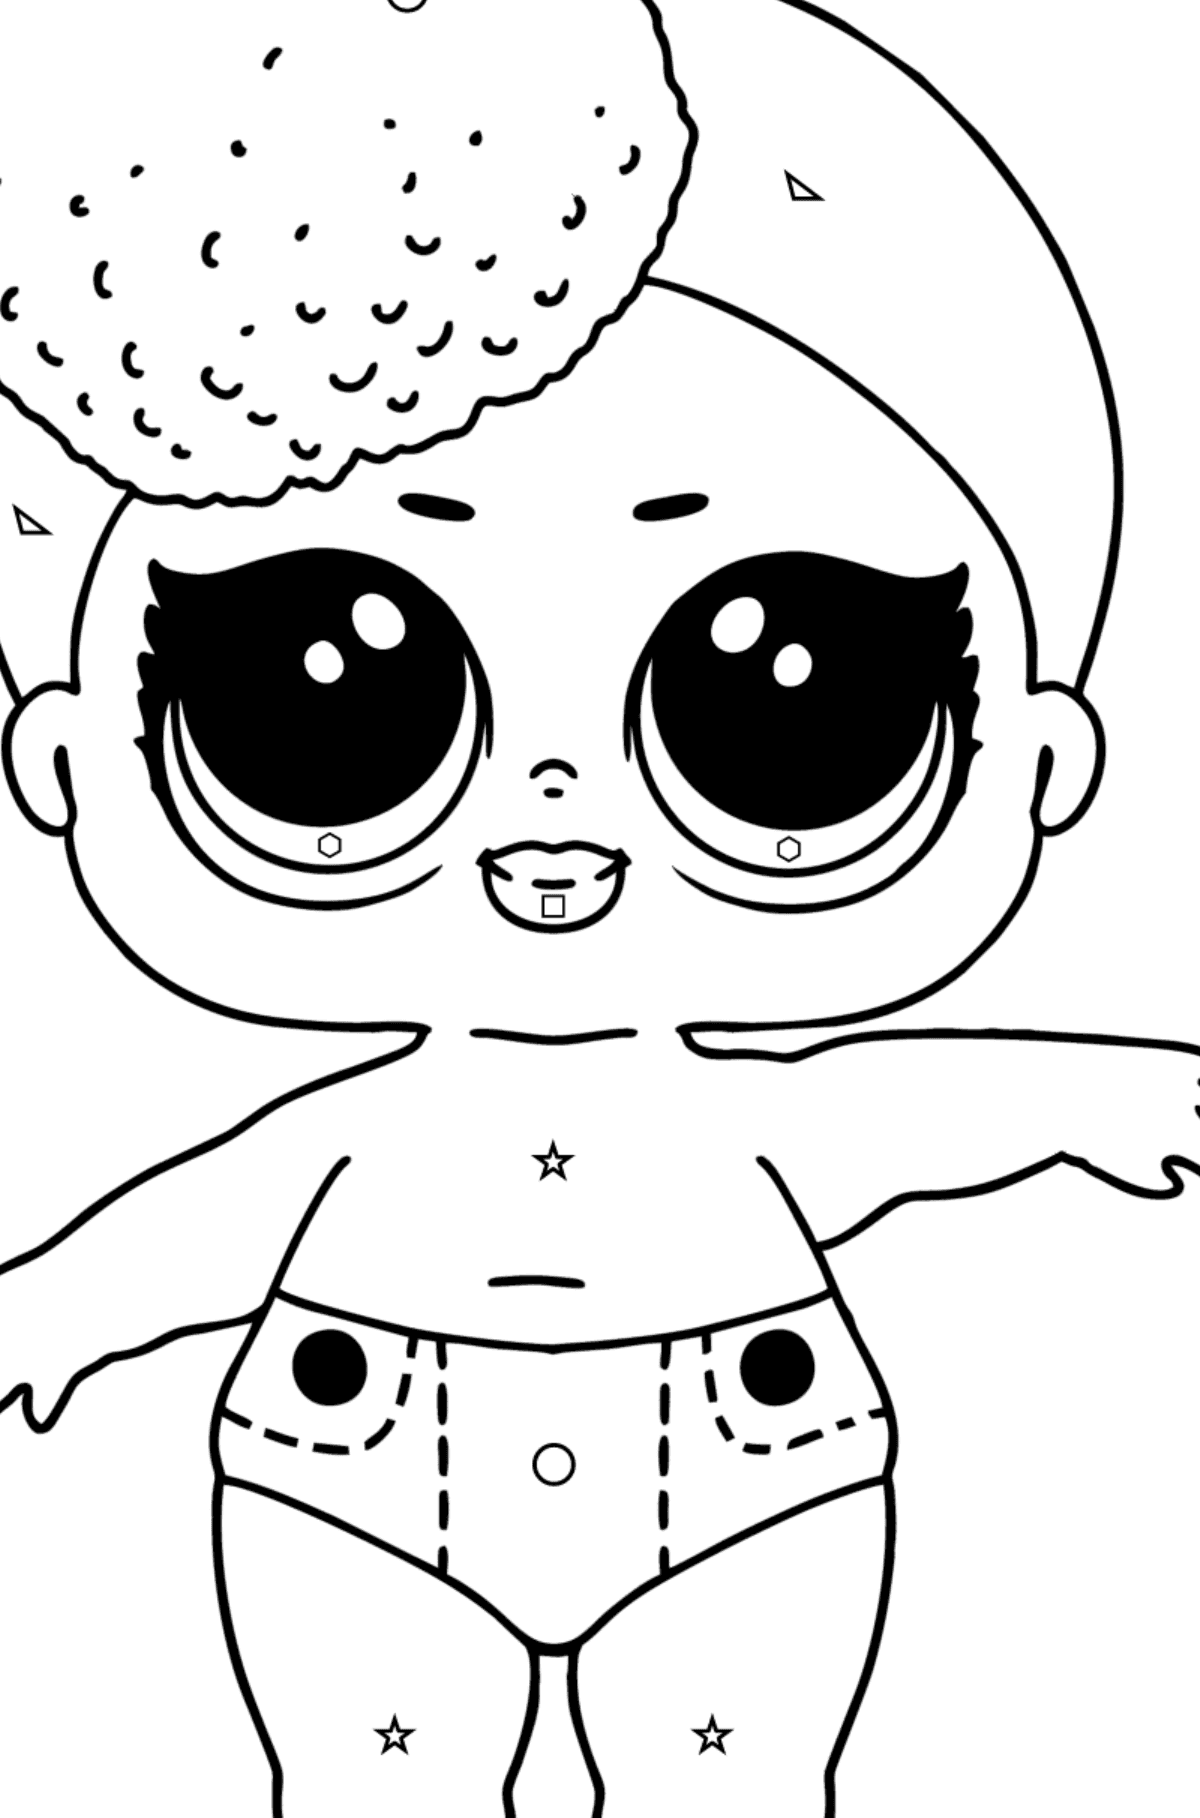 Coloring page LOL LIL Independent - Coloring by Geometric Shapes for Kids